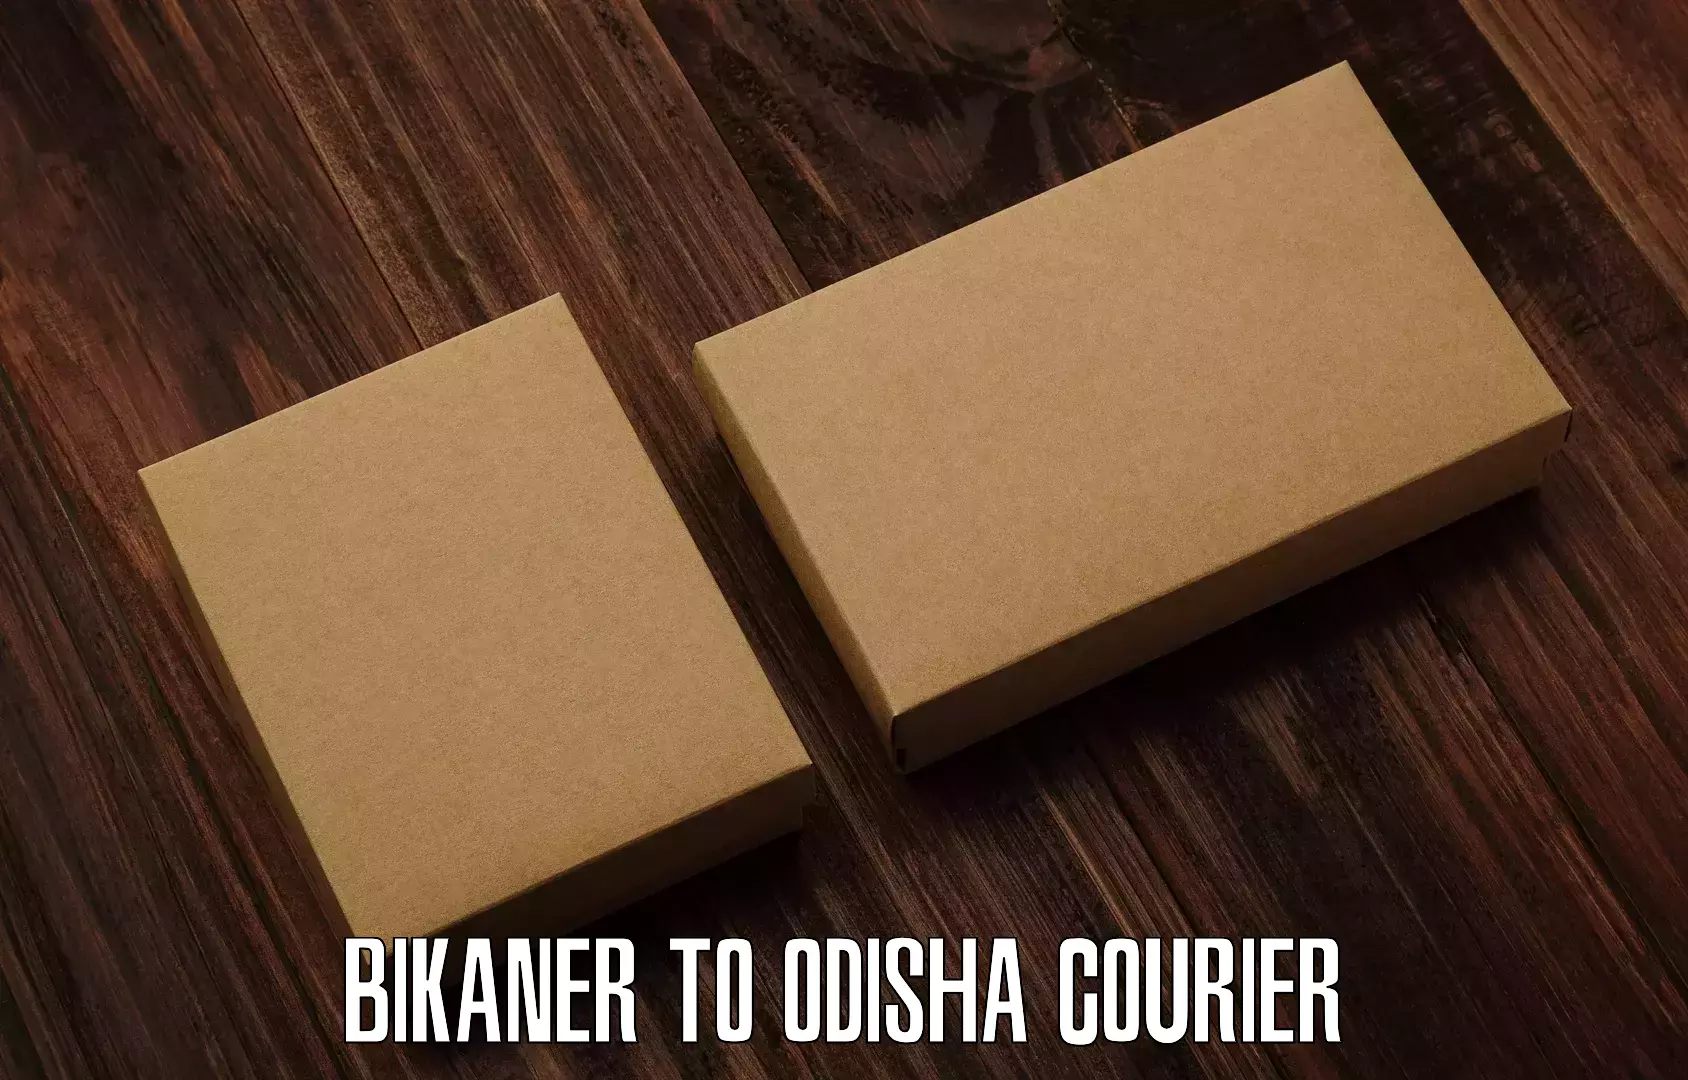 24-hour delivery options Bikaner to Gumadera